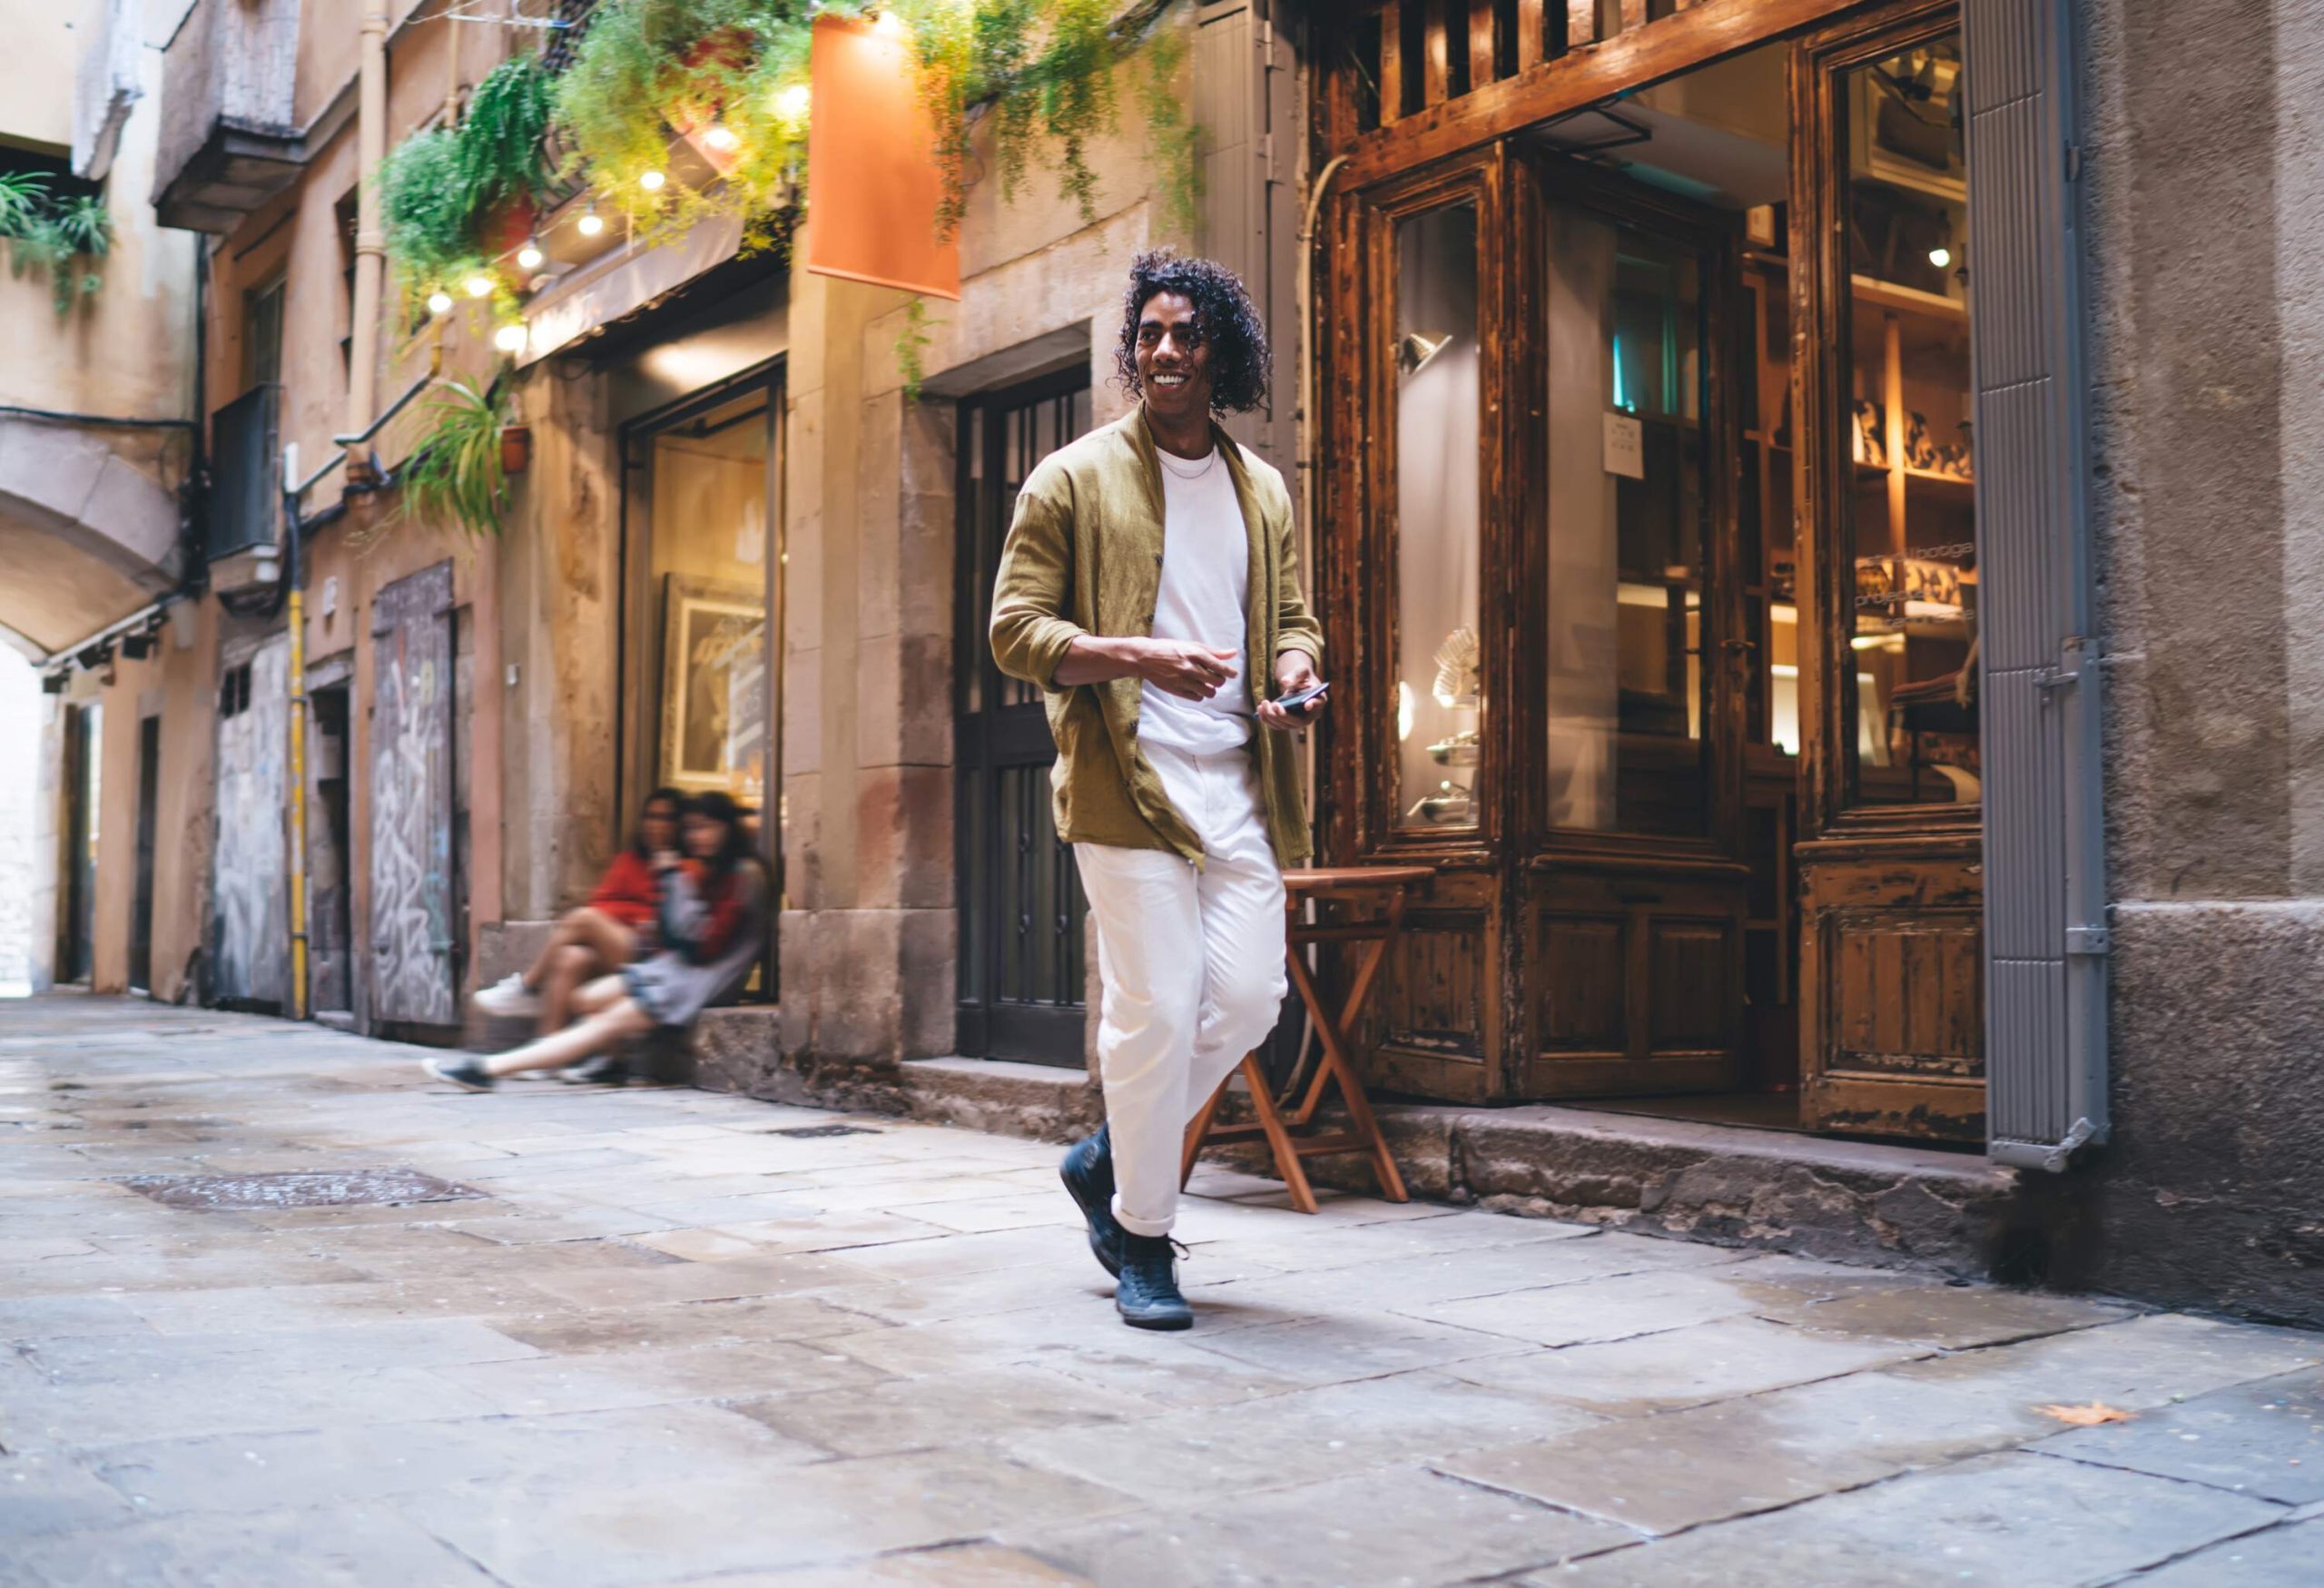 A man in a white outfit and brown blazer happily walking down a cobbled street in front of classic building stalls.